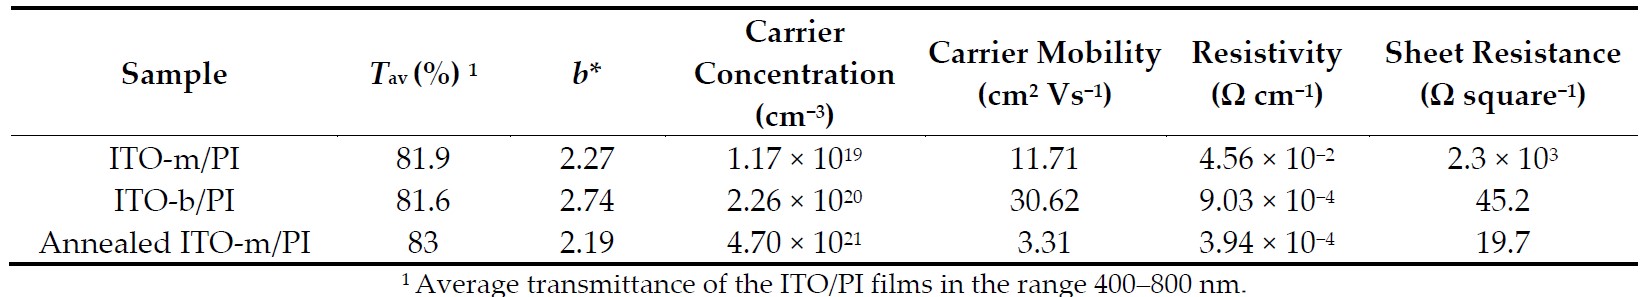 Table 5. Optical and Electrical Properties of the As-Deposited ITO-m/PI and ITO-b/PI Films and Annealed ITO-m/PI Film.